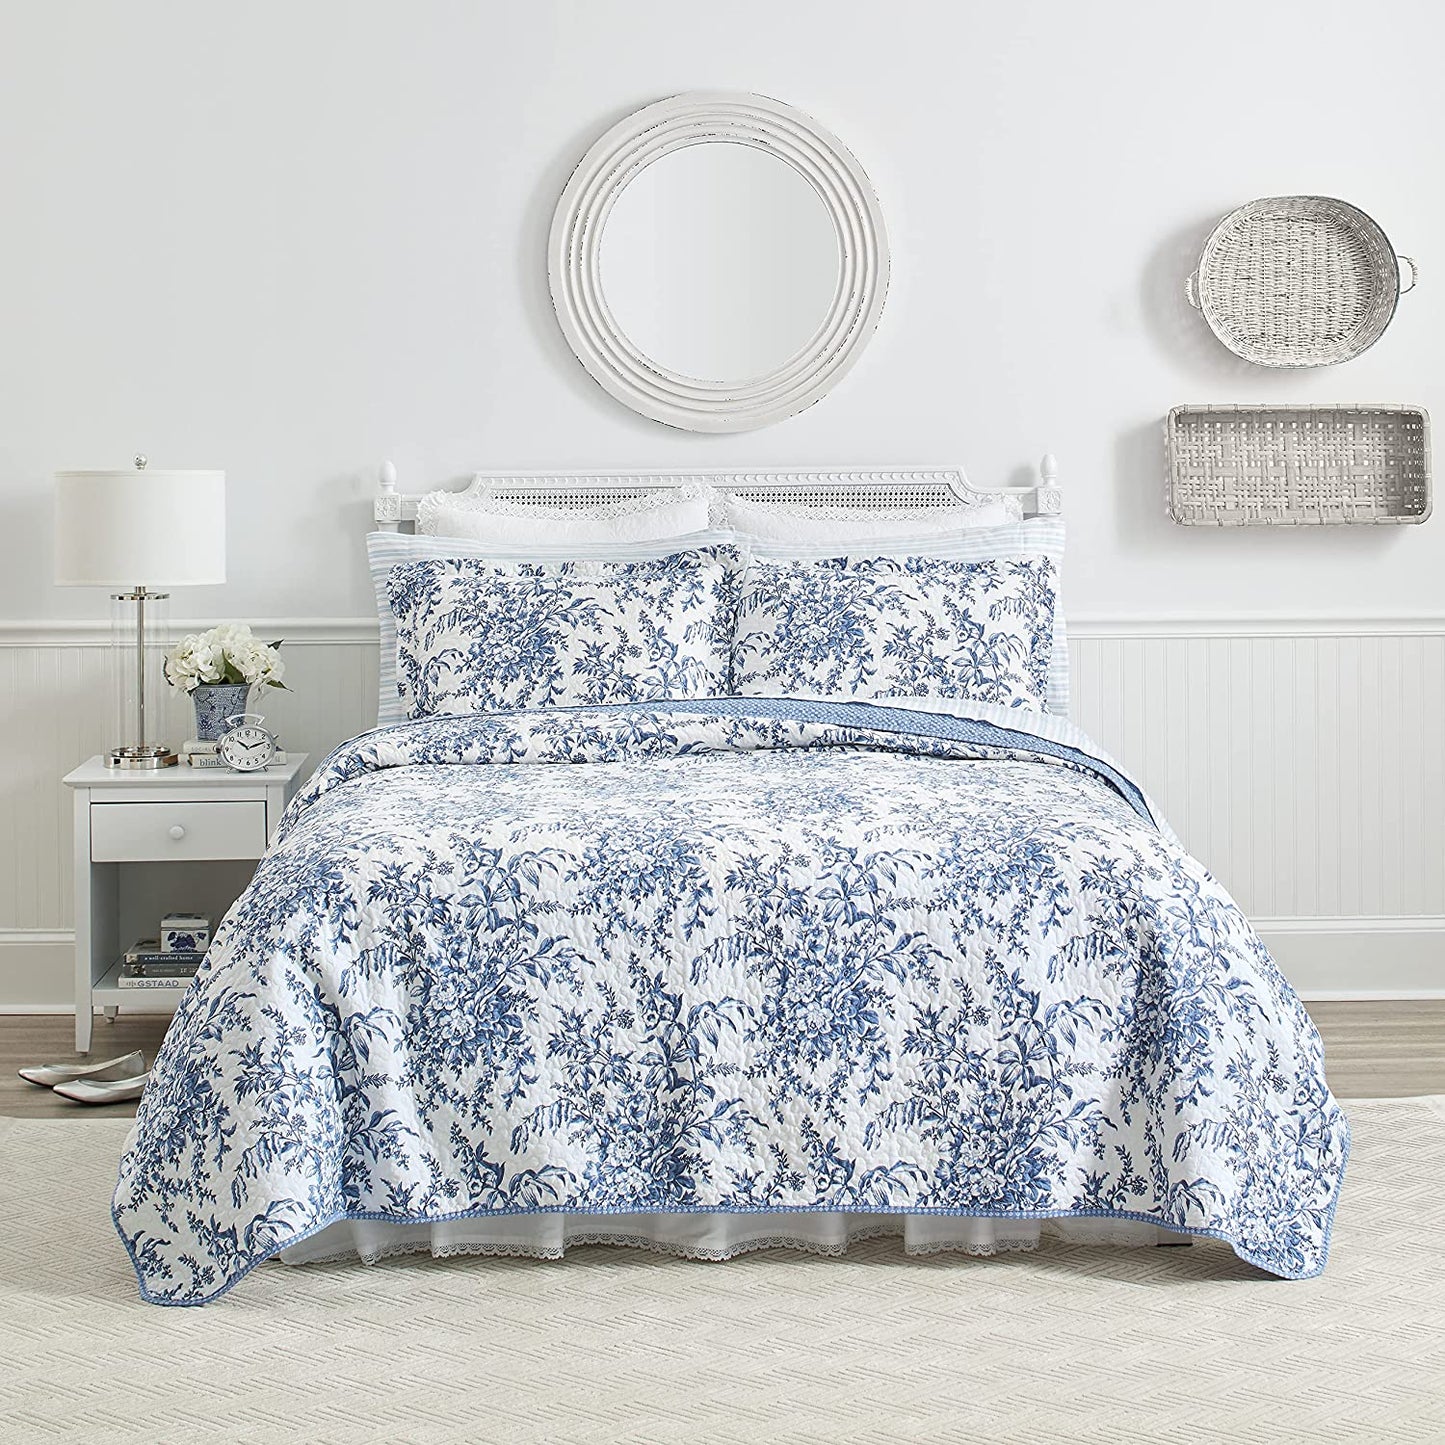 Pure cotton Lightweight Casual Coastal Style 3 Pieces Quilt Set with 2 Pillowcases